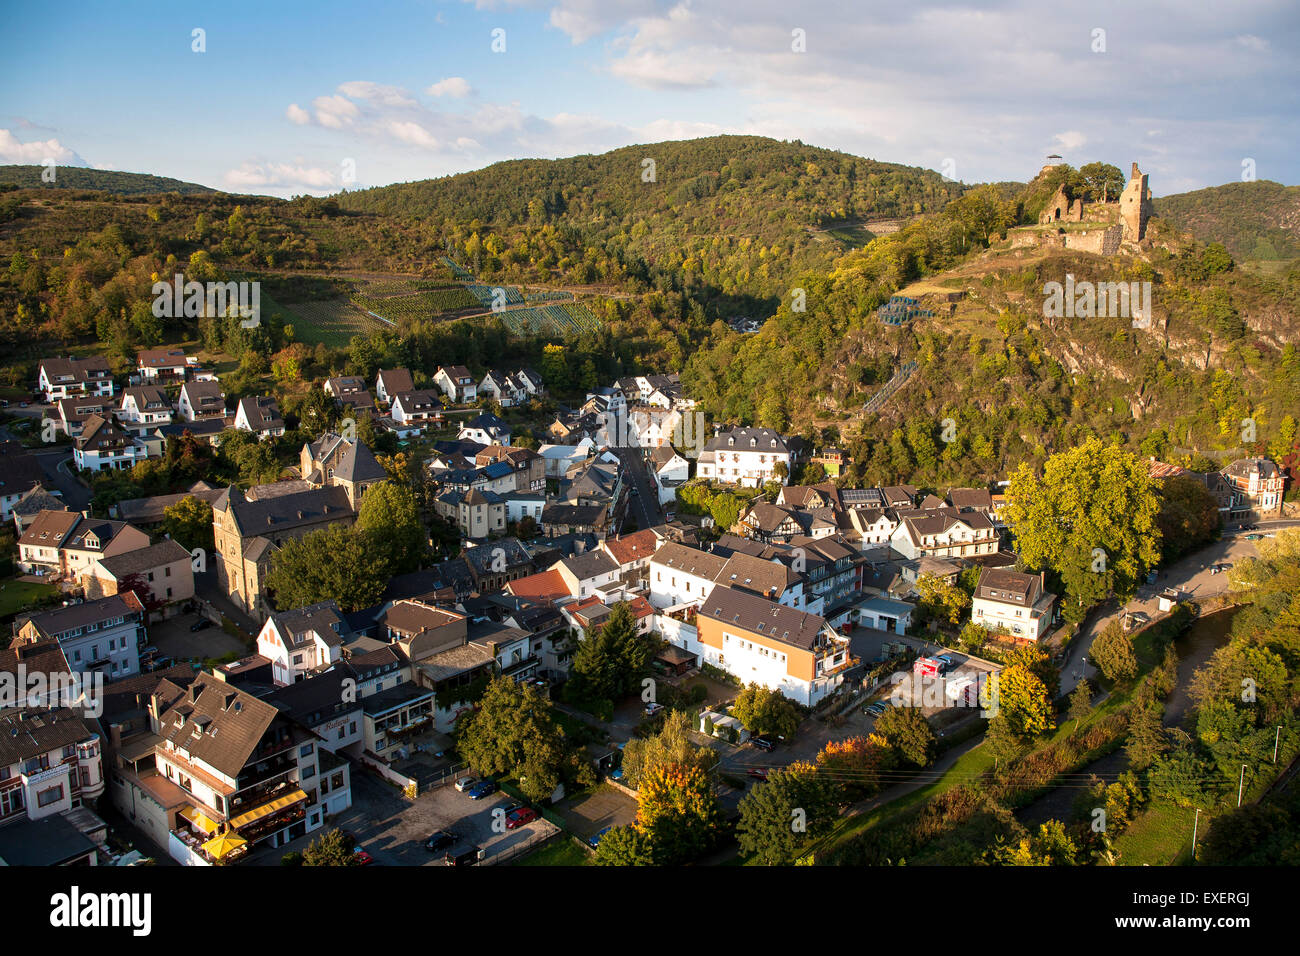 Europe, Germany, Rhineland-Palatinate, Eifel region, view to Altenahr at the river Ahr, on the right the castle Are.  Europa, De Stock Photo